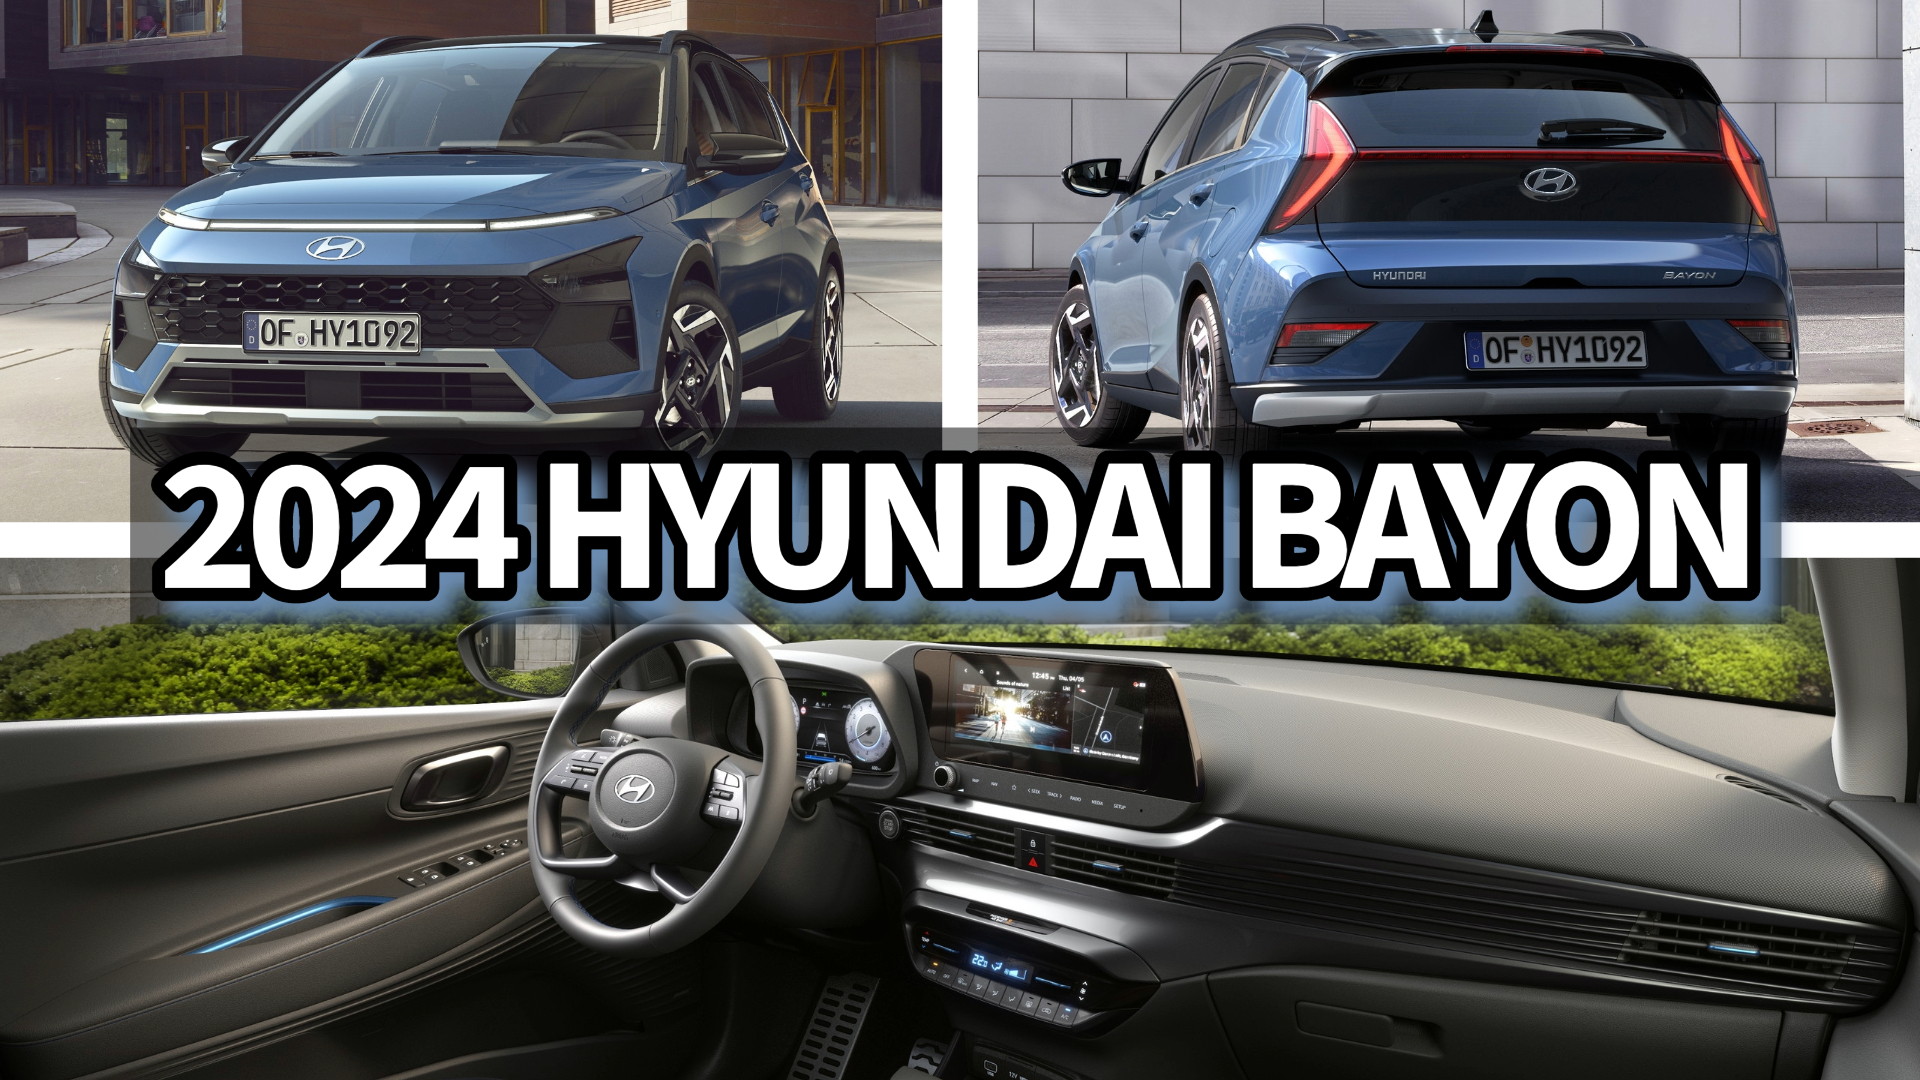 2024 Hyundai Bayon Reveals Its Updates Inside and Out, See What